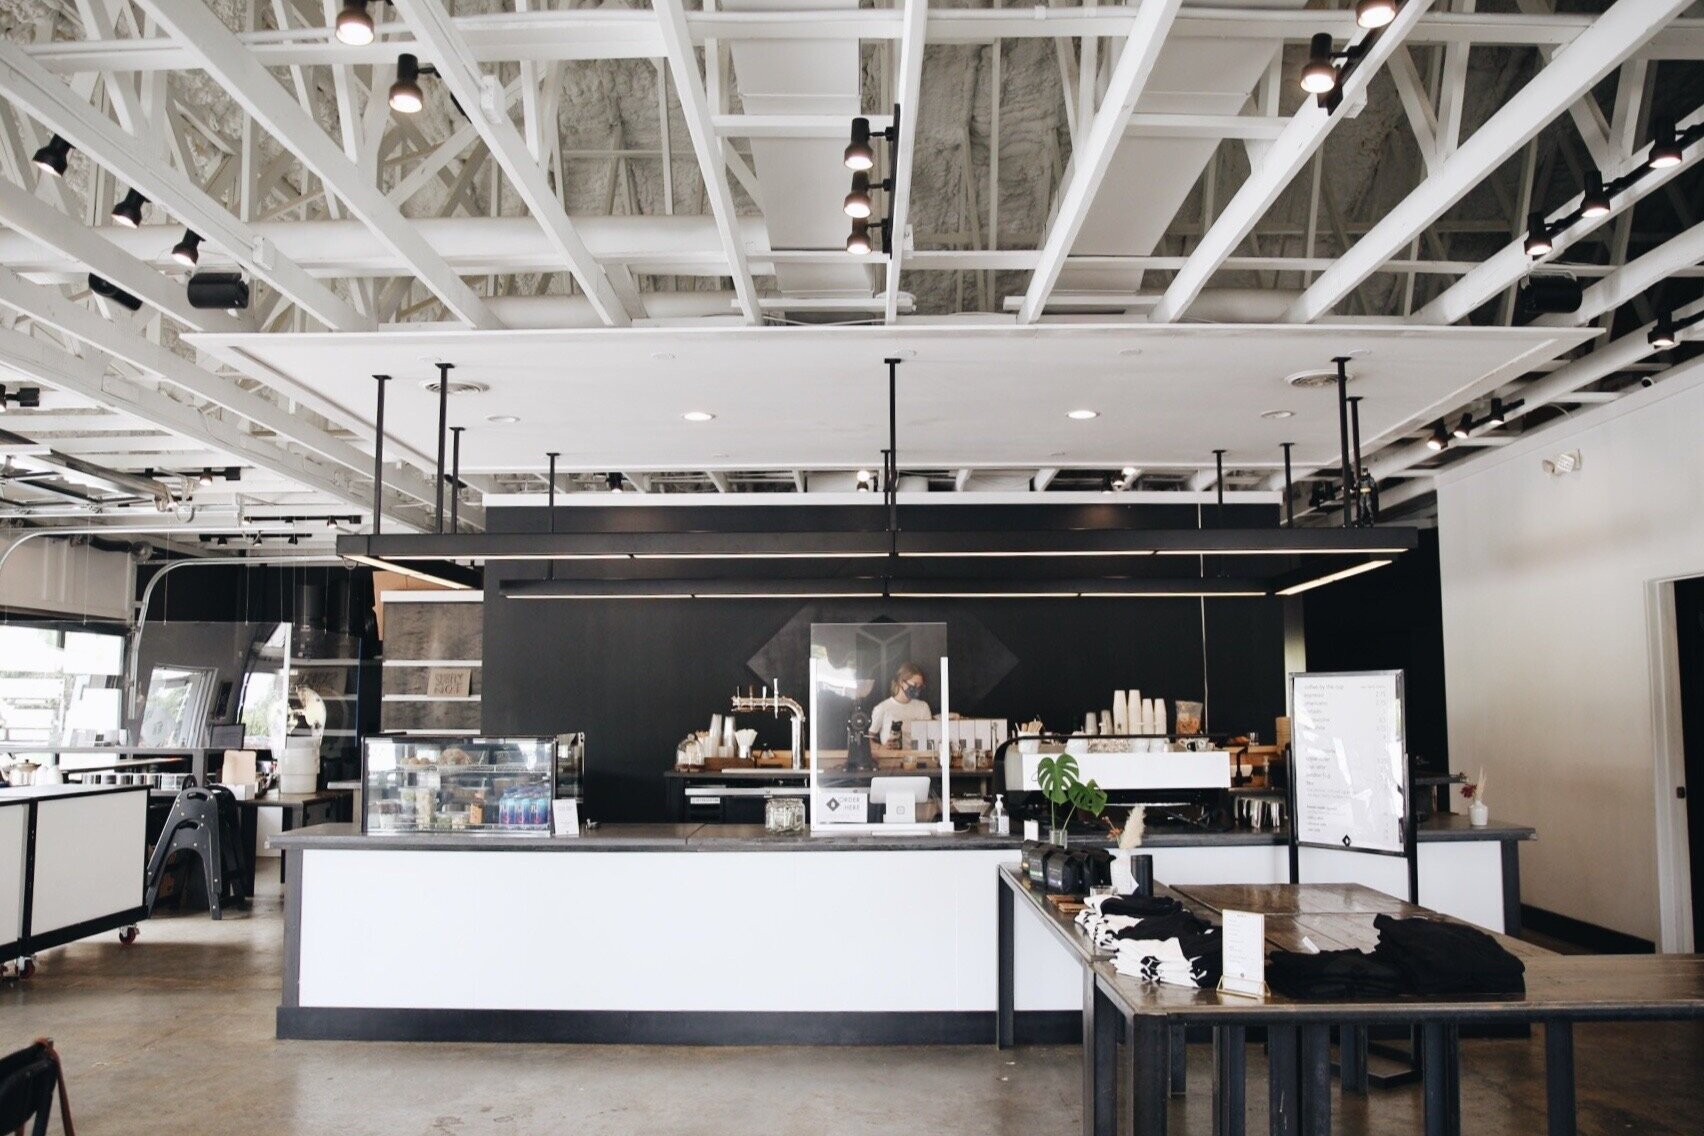 LOCATIONS — Post Coffee Co